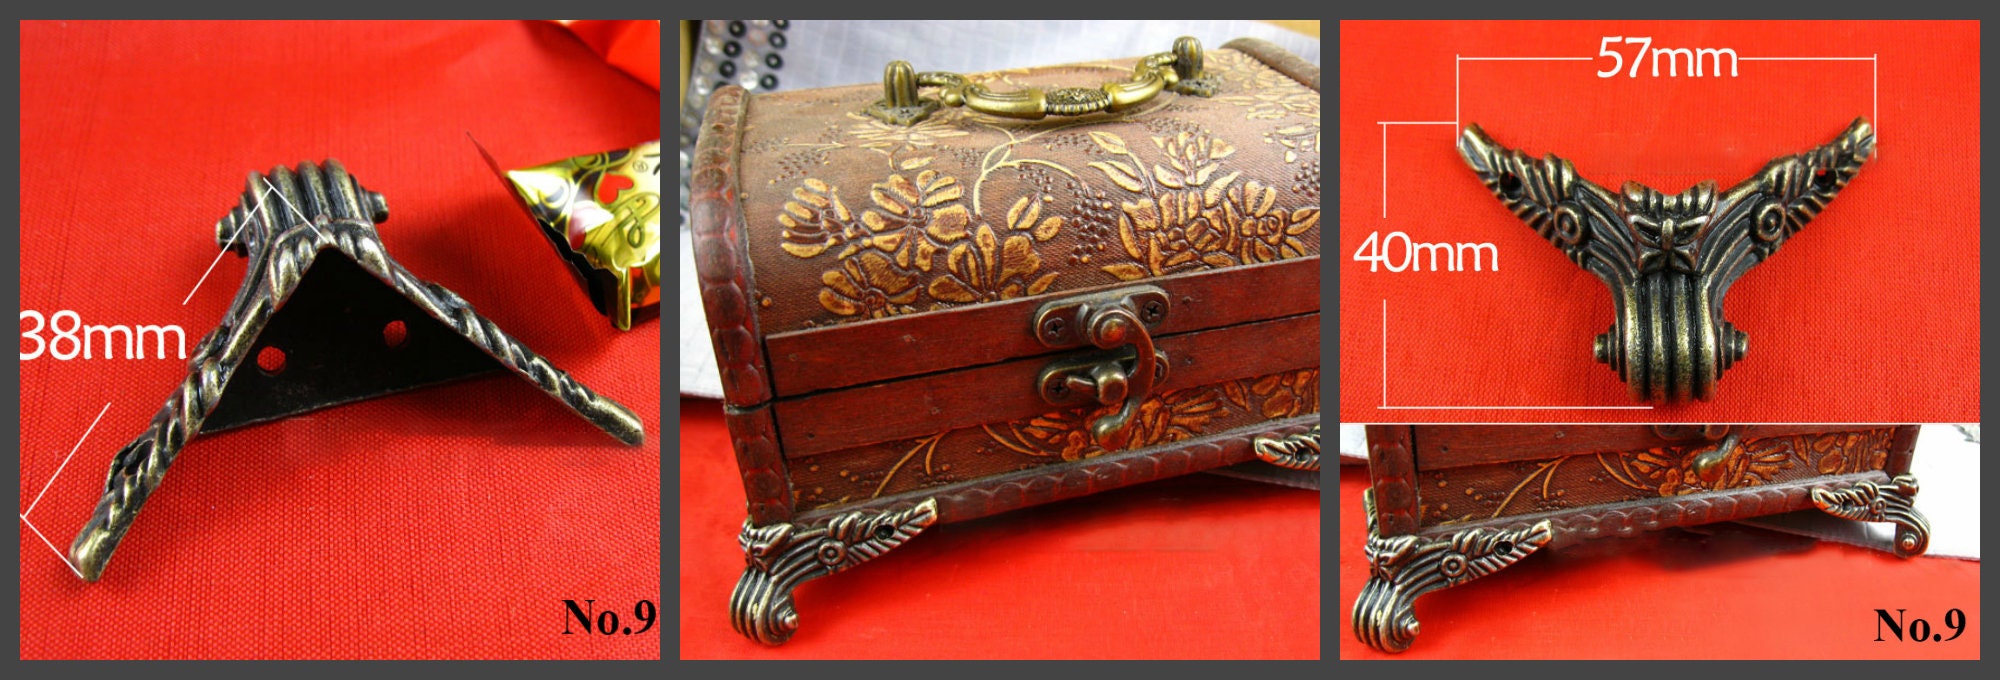 Decorative Feet Wooden Jewelry Box Corner Protector Foot Leg Guard Tiger Paw Claw Dragon Wing Vintage Bronze Gold 20 29 30 40 42 57 60 62mm